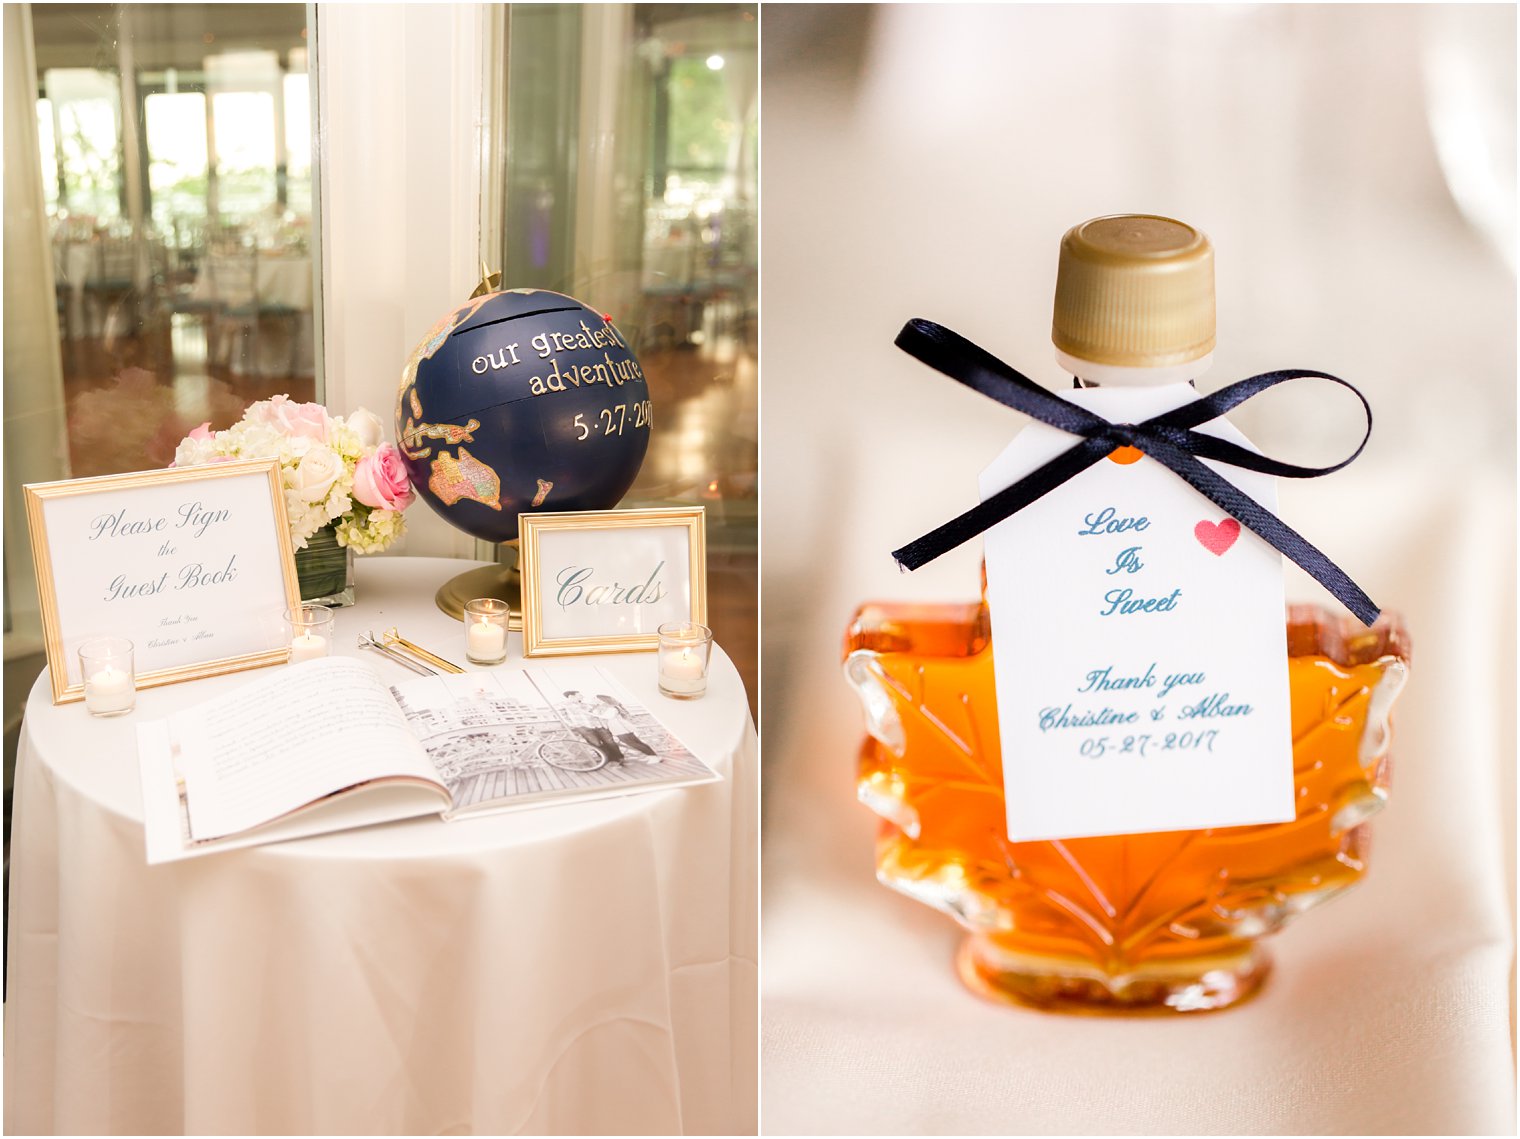 Canadian maple syrup wedding favor | Guest book idea with globe | Photos by Idalia Photography